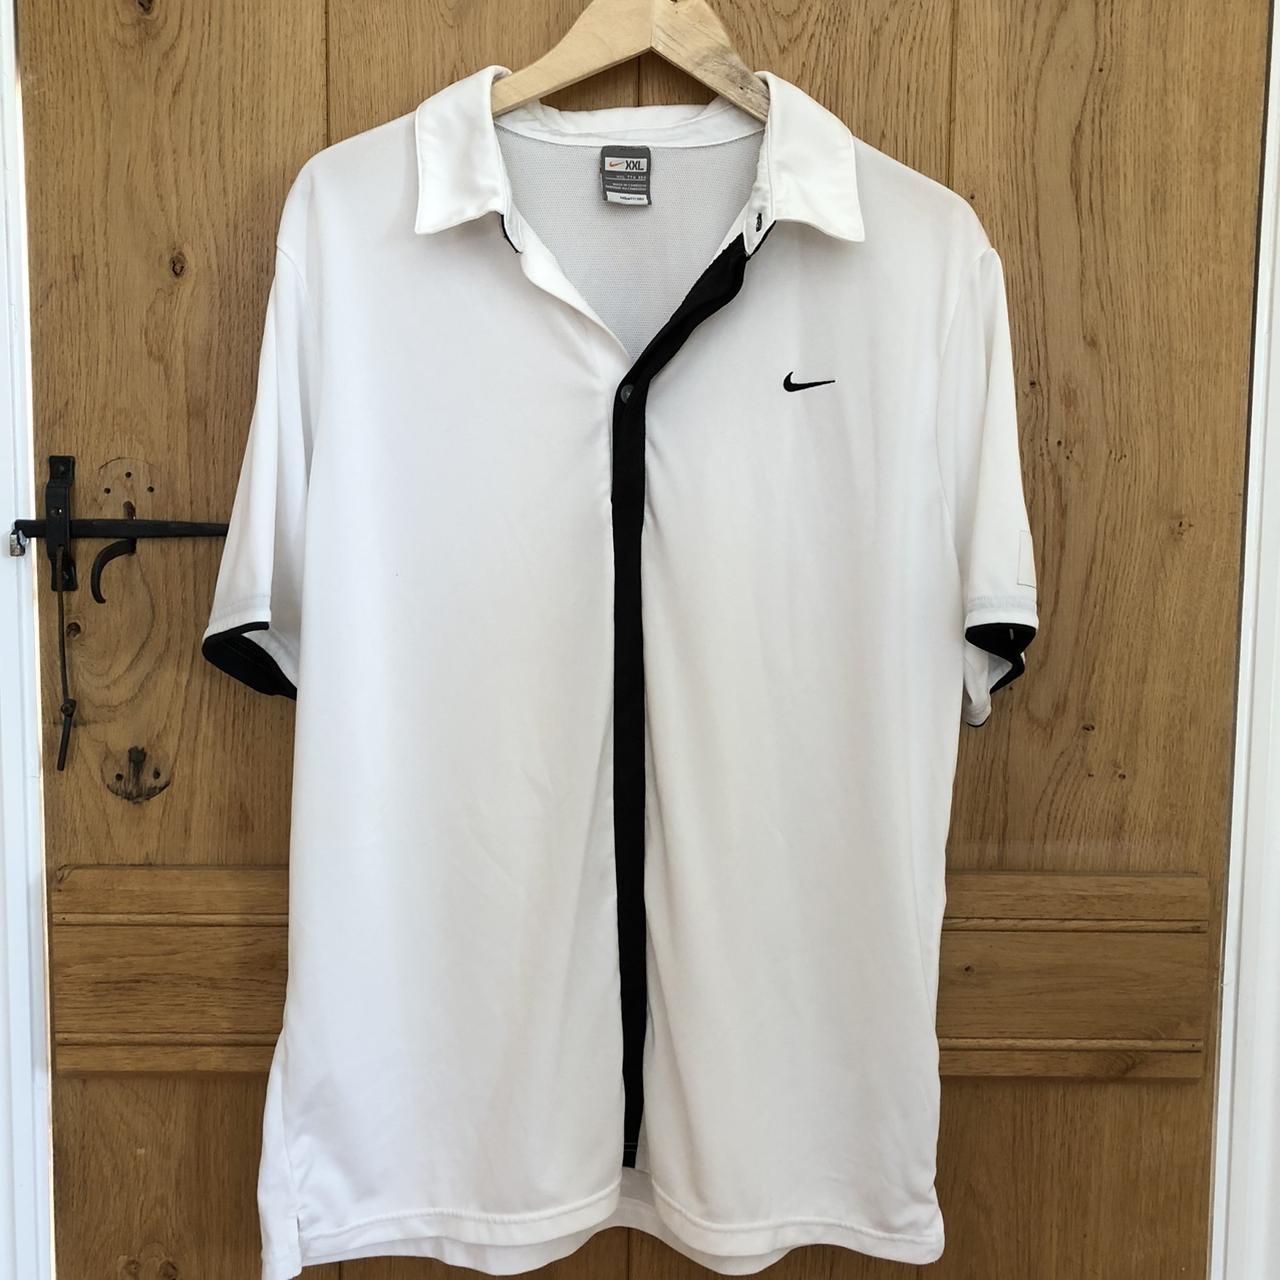 Nike dry fit polo shirt Breathable material Good... - Depop